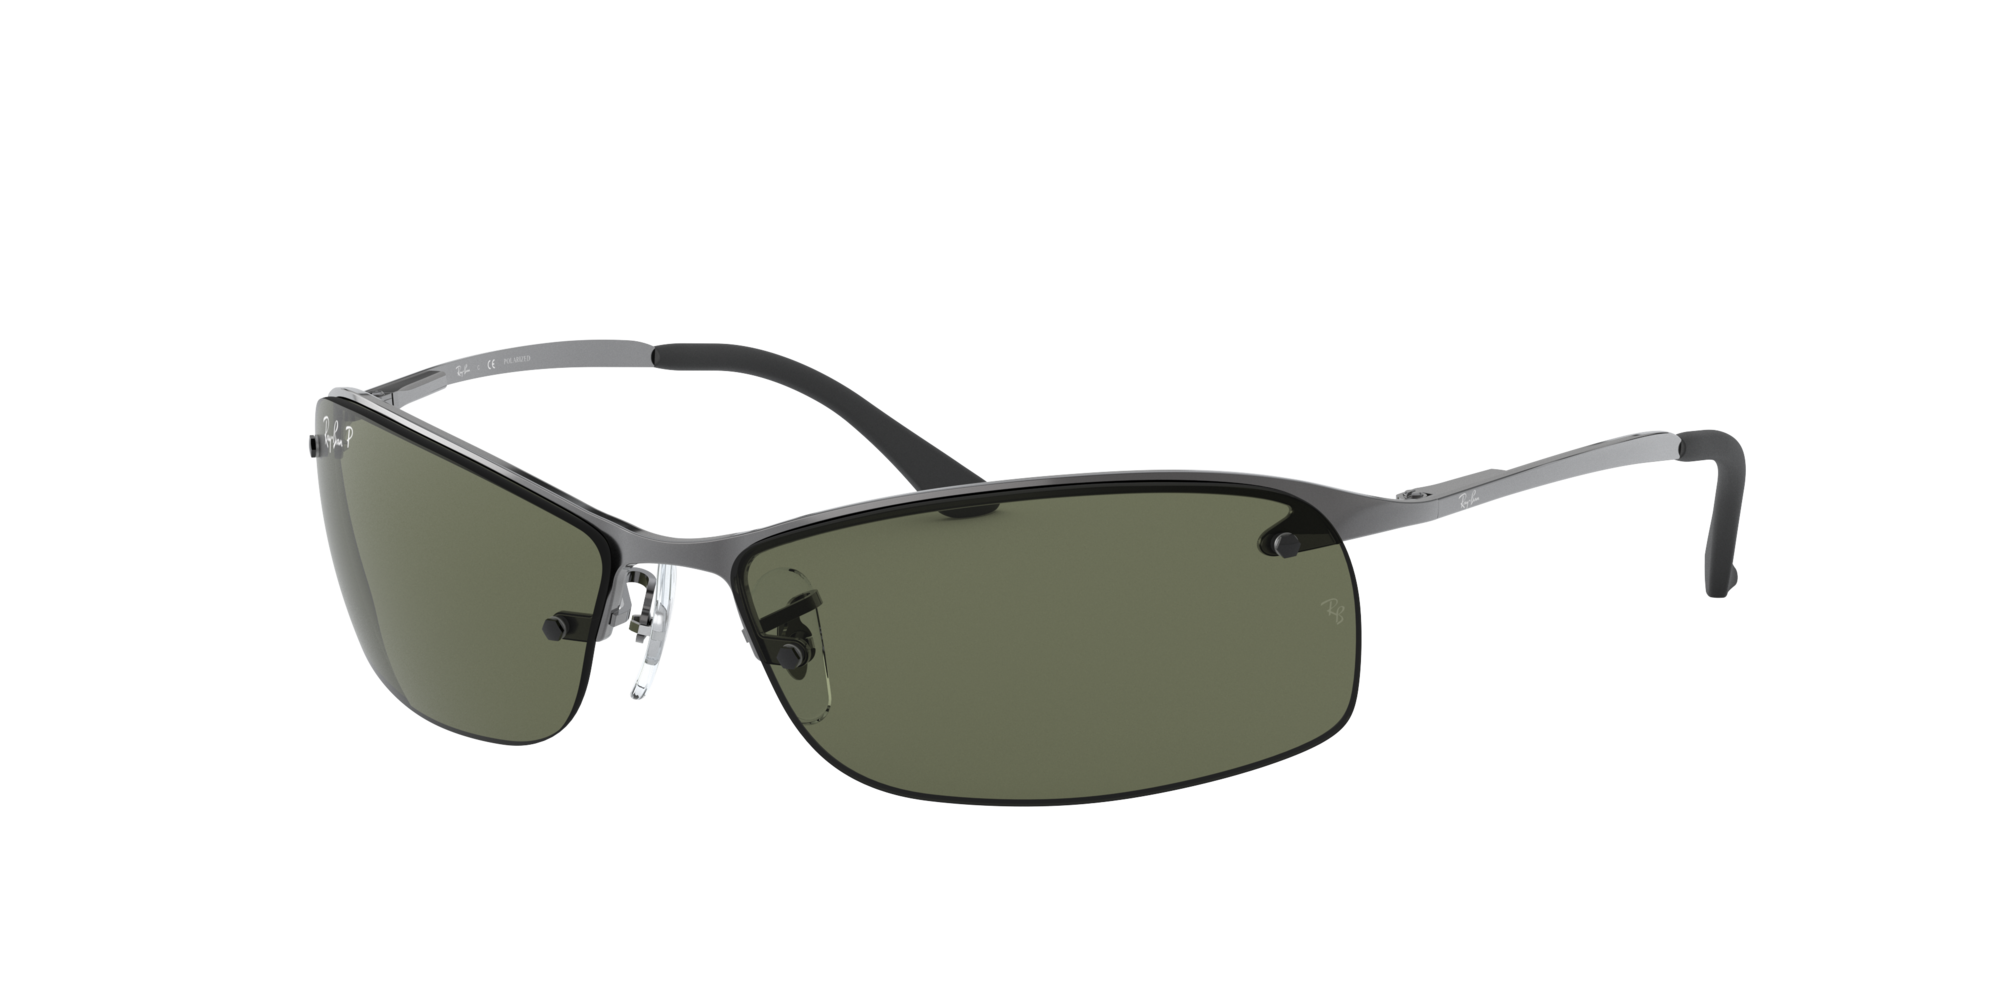 Angle_Left01 Ray-Ban RB 3183 (004/9A) Sunglasses Green / Silver